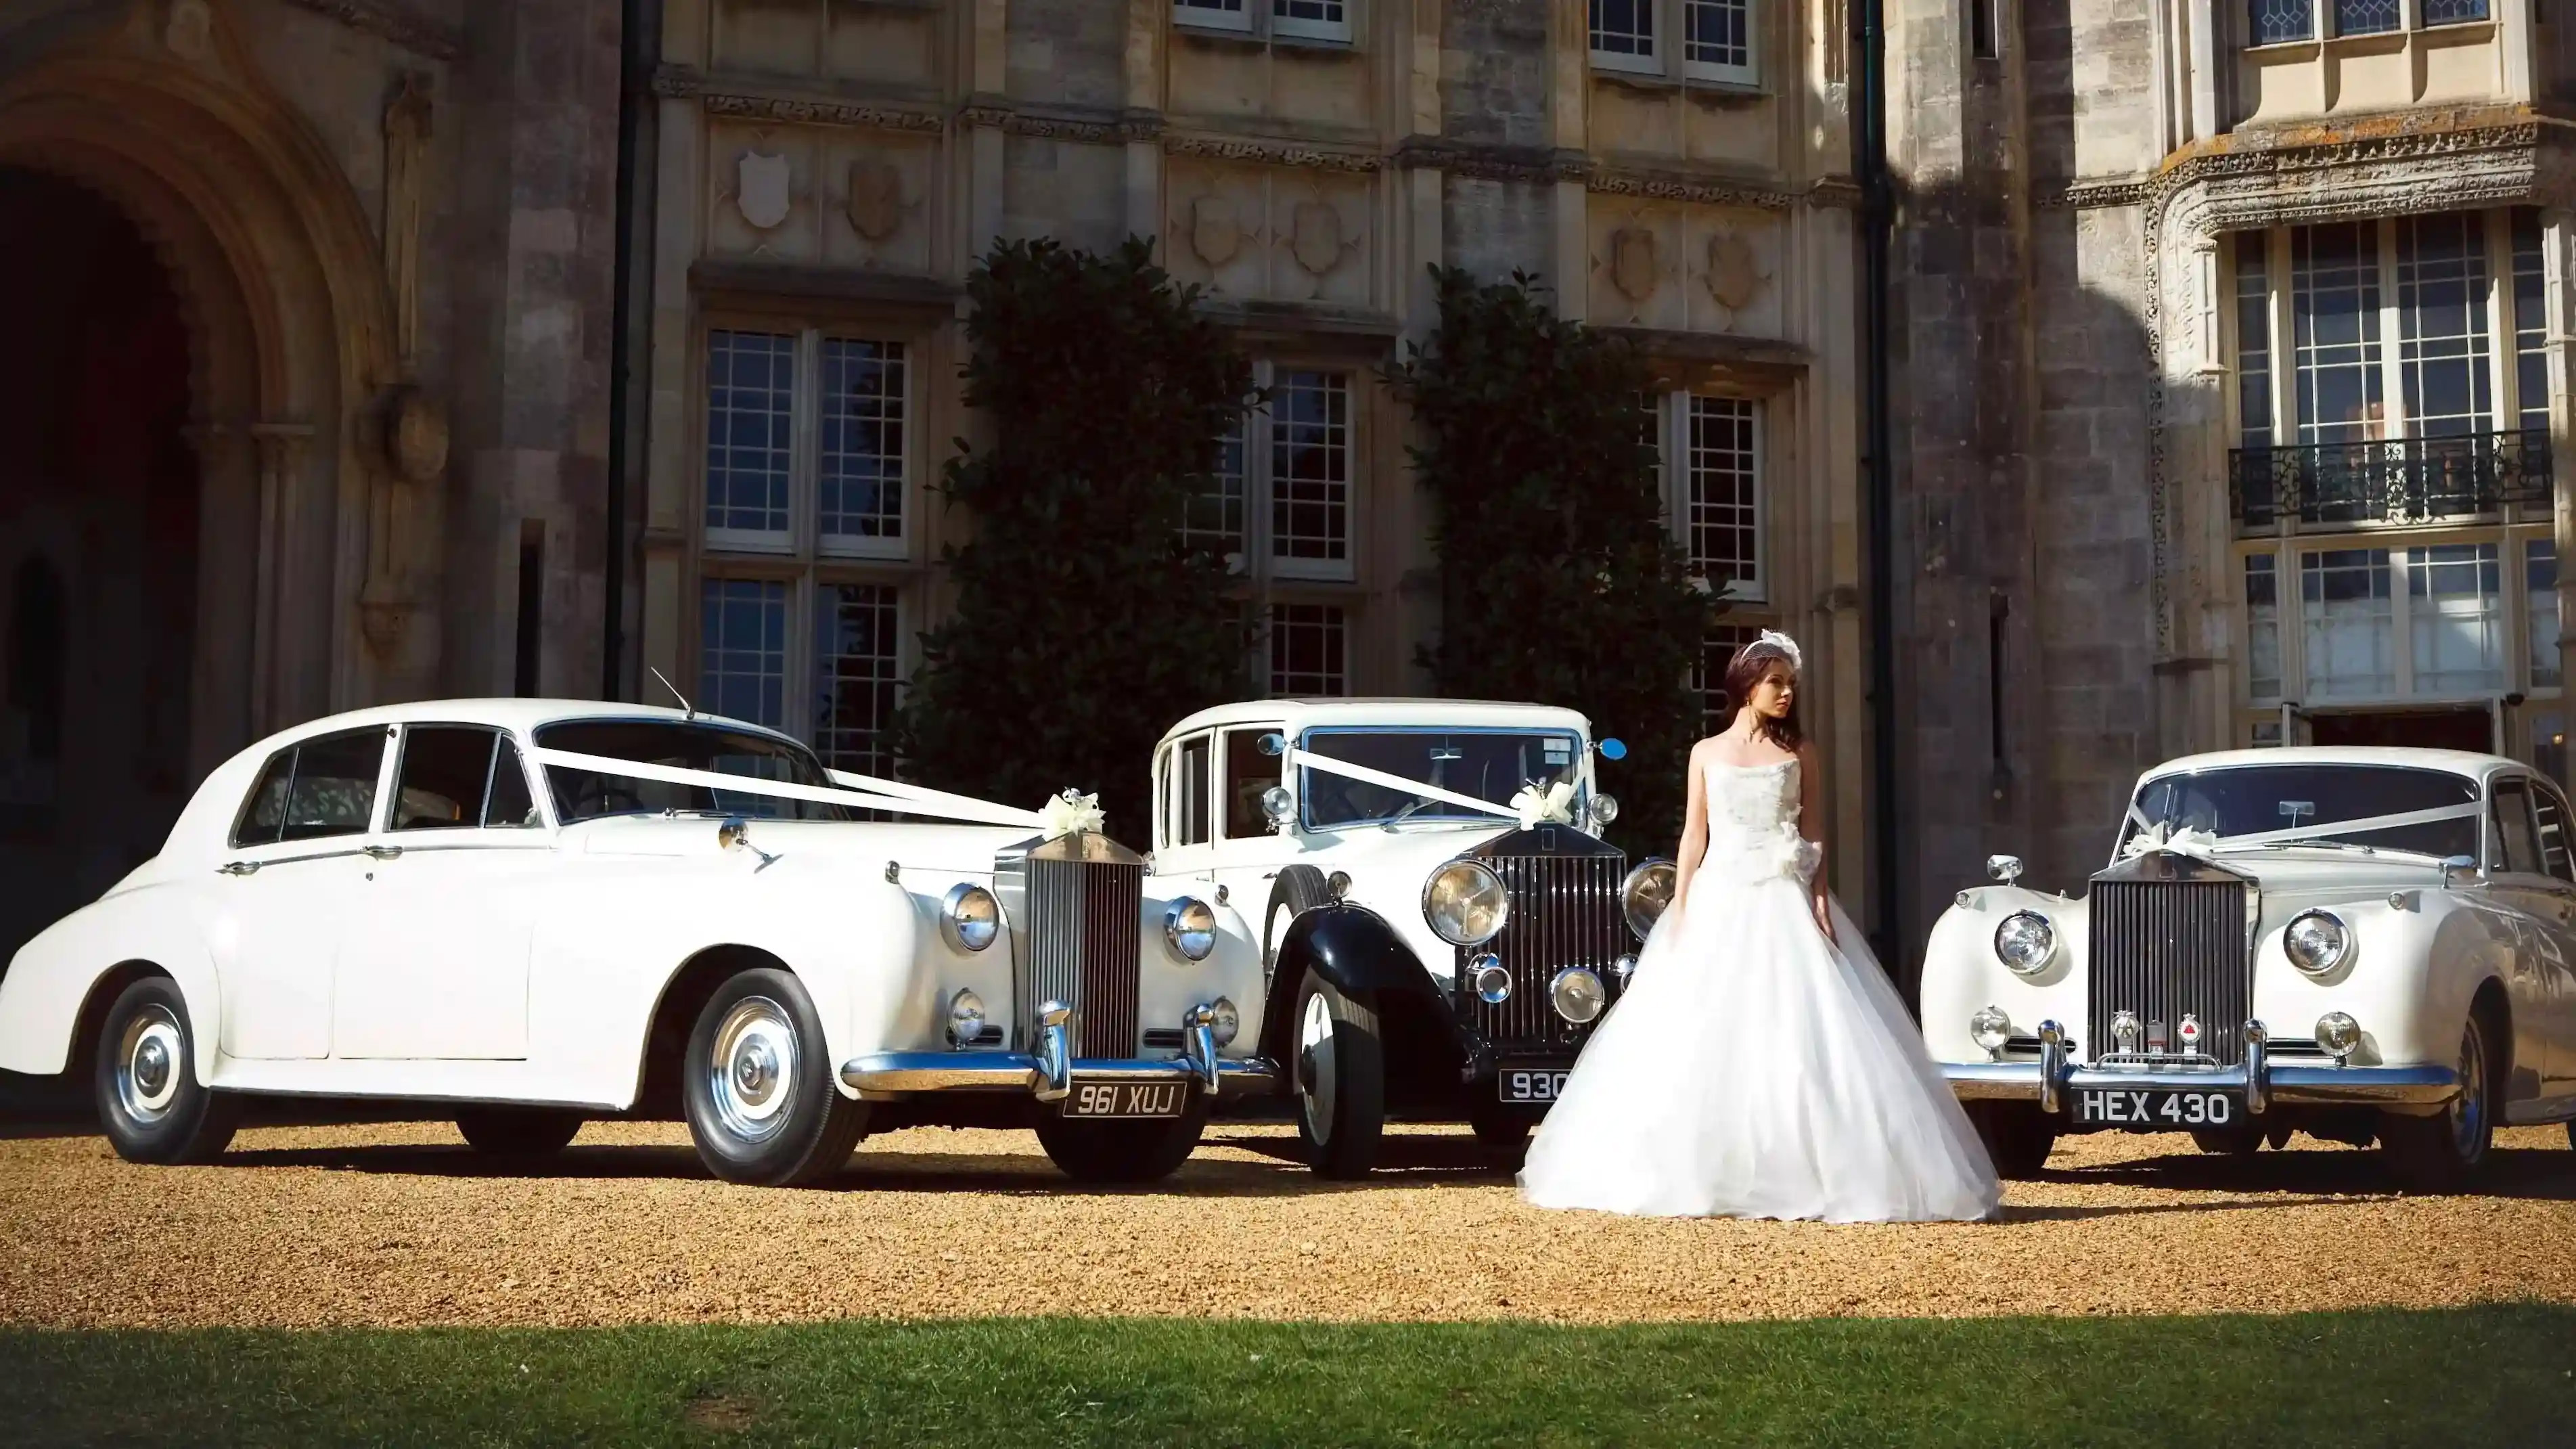 Selection of three classic and Vintage Rolls-Royce in White with Bride wearing a white wedding dress standing in the middle of the vehicles. Background is a popular Devon wedding venue in the style of a castle.